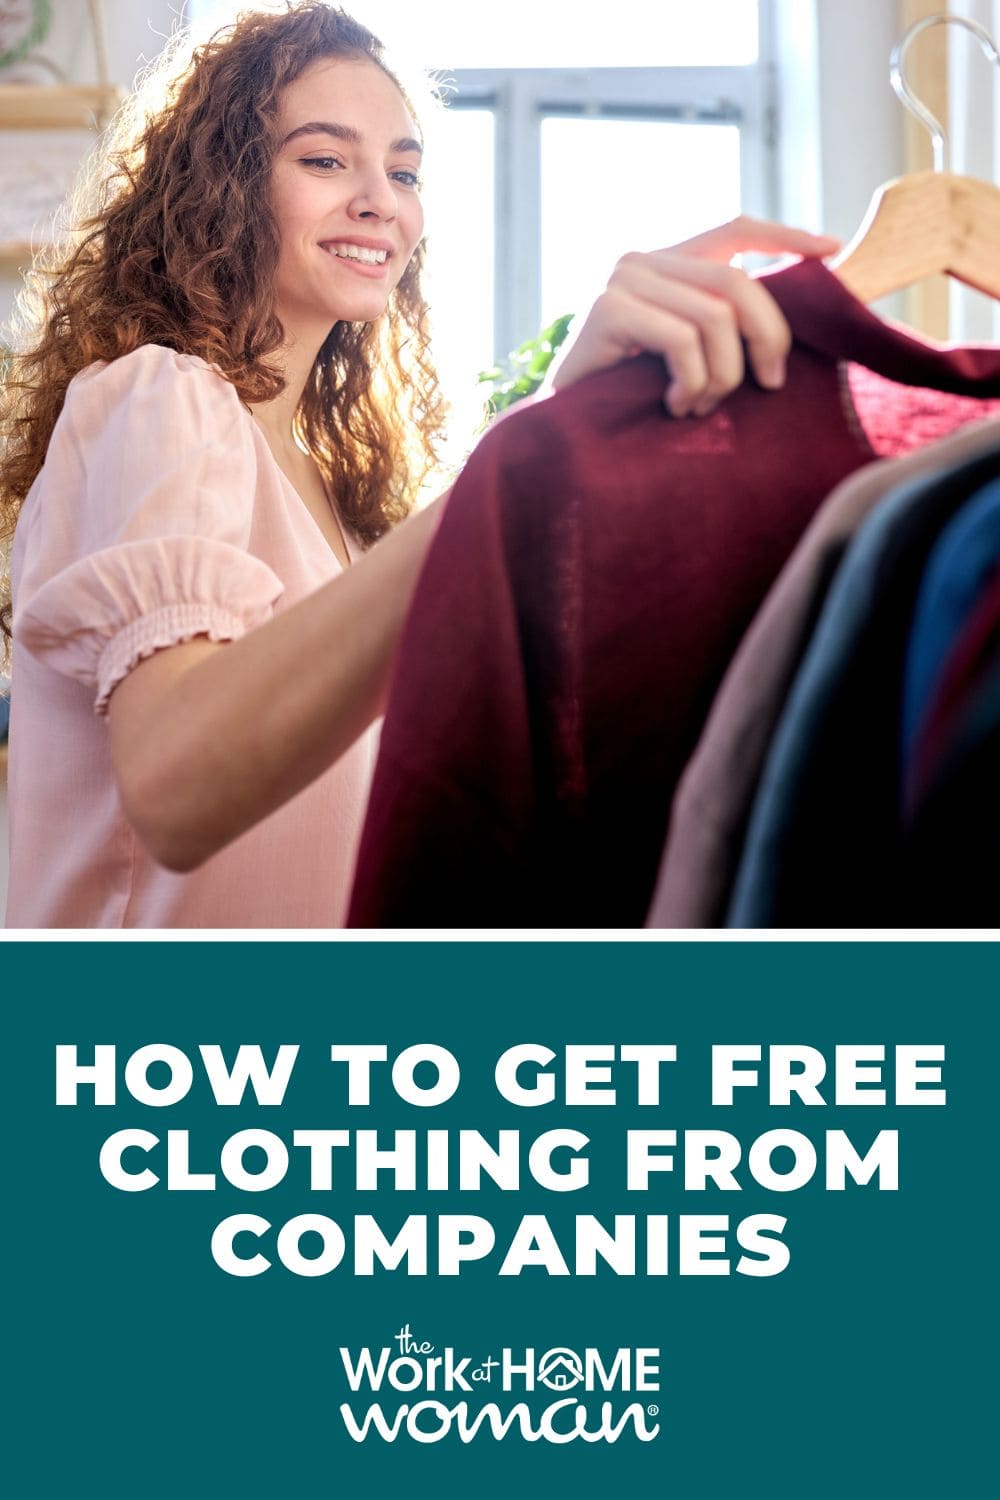 Clothing is a basic need, yet it is quite expensive. Here are some of the best-proven ways to get free clothing from companies, online and in person.